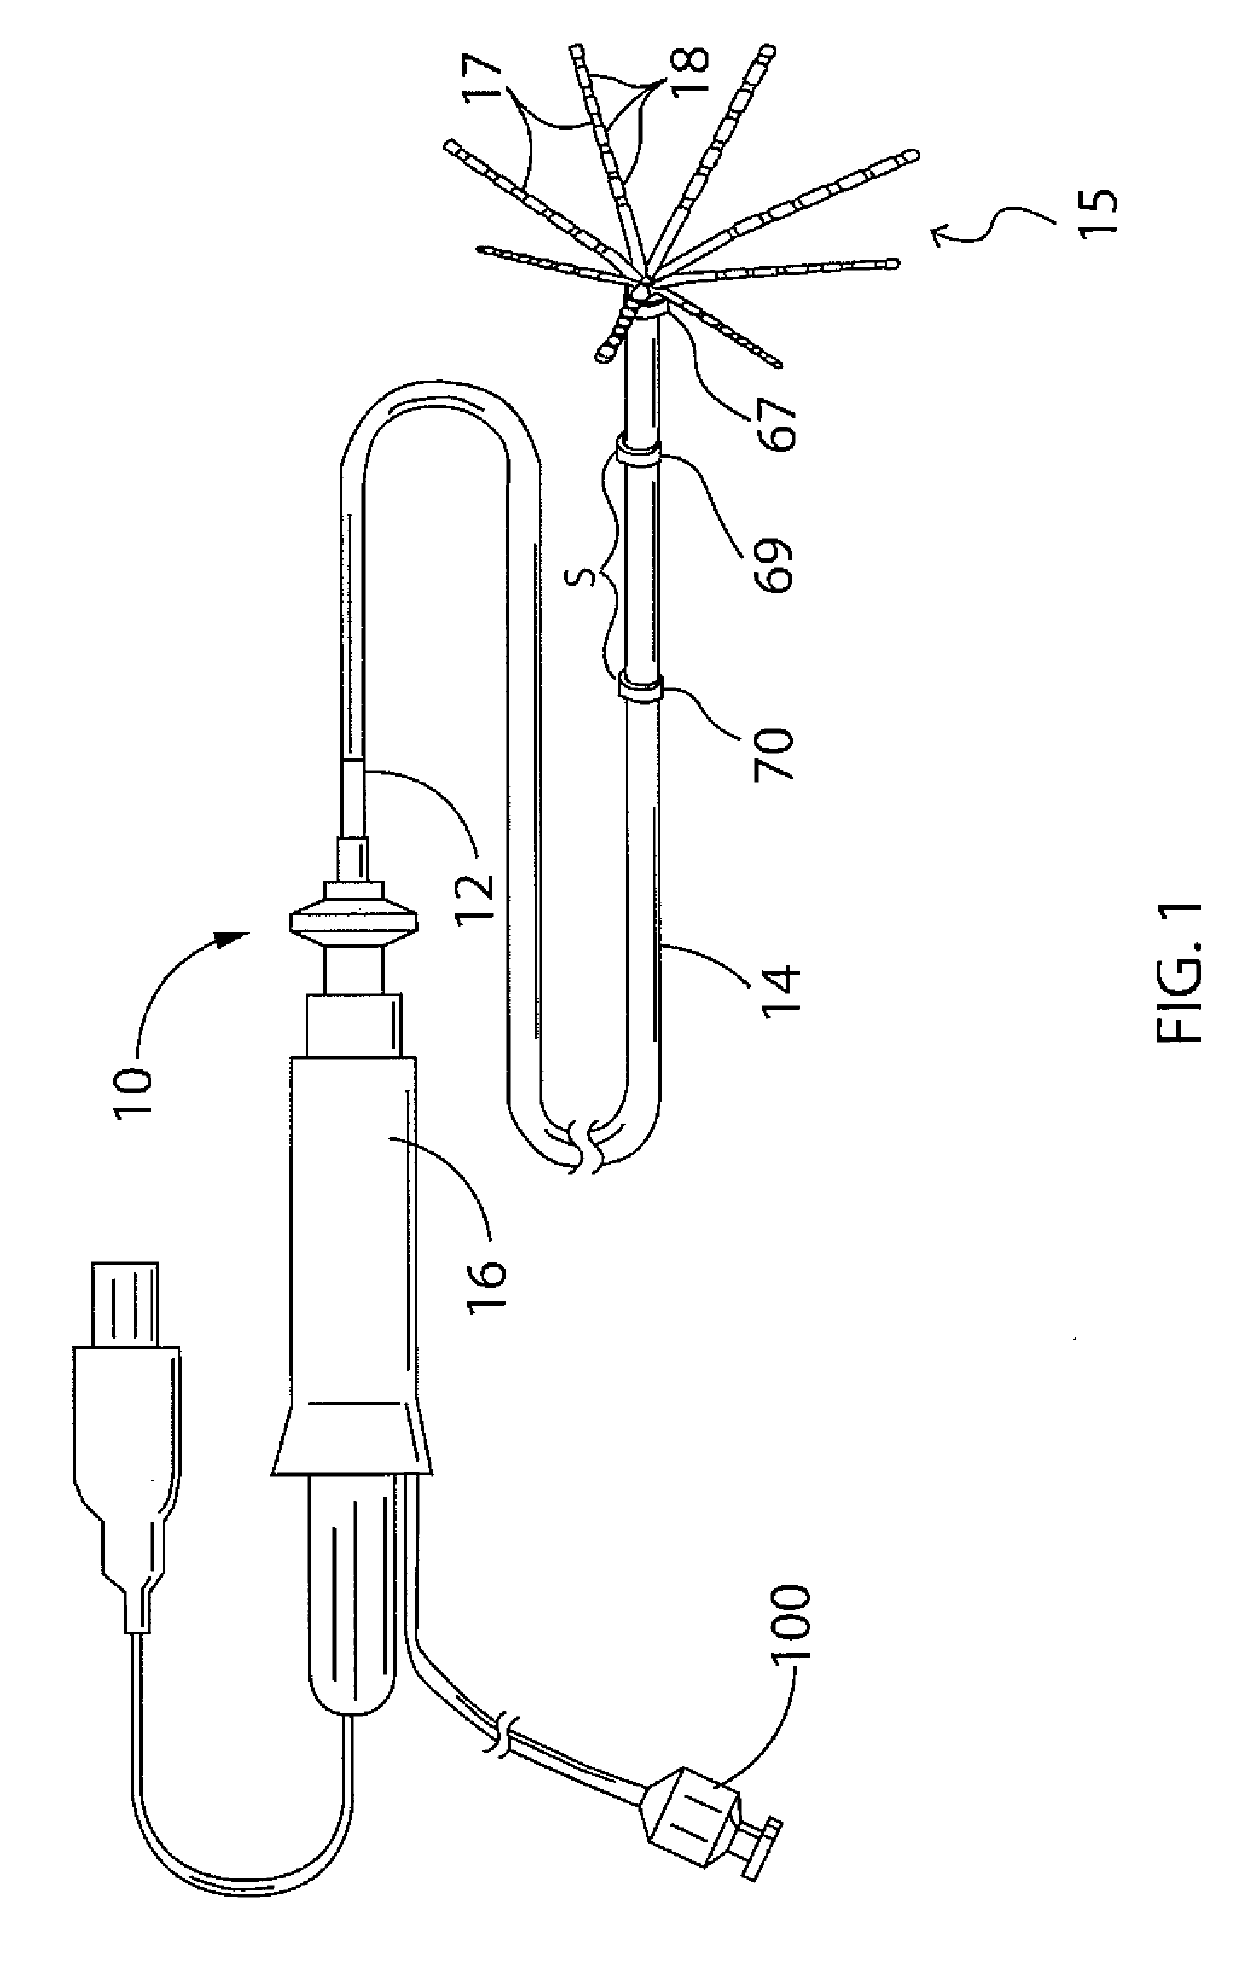 Catheter with electrode spine assembly having preformed configurations for improved tissue contact